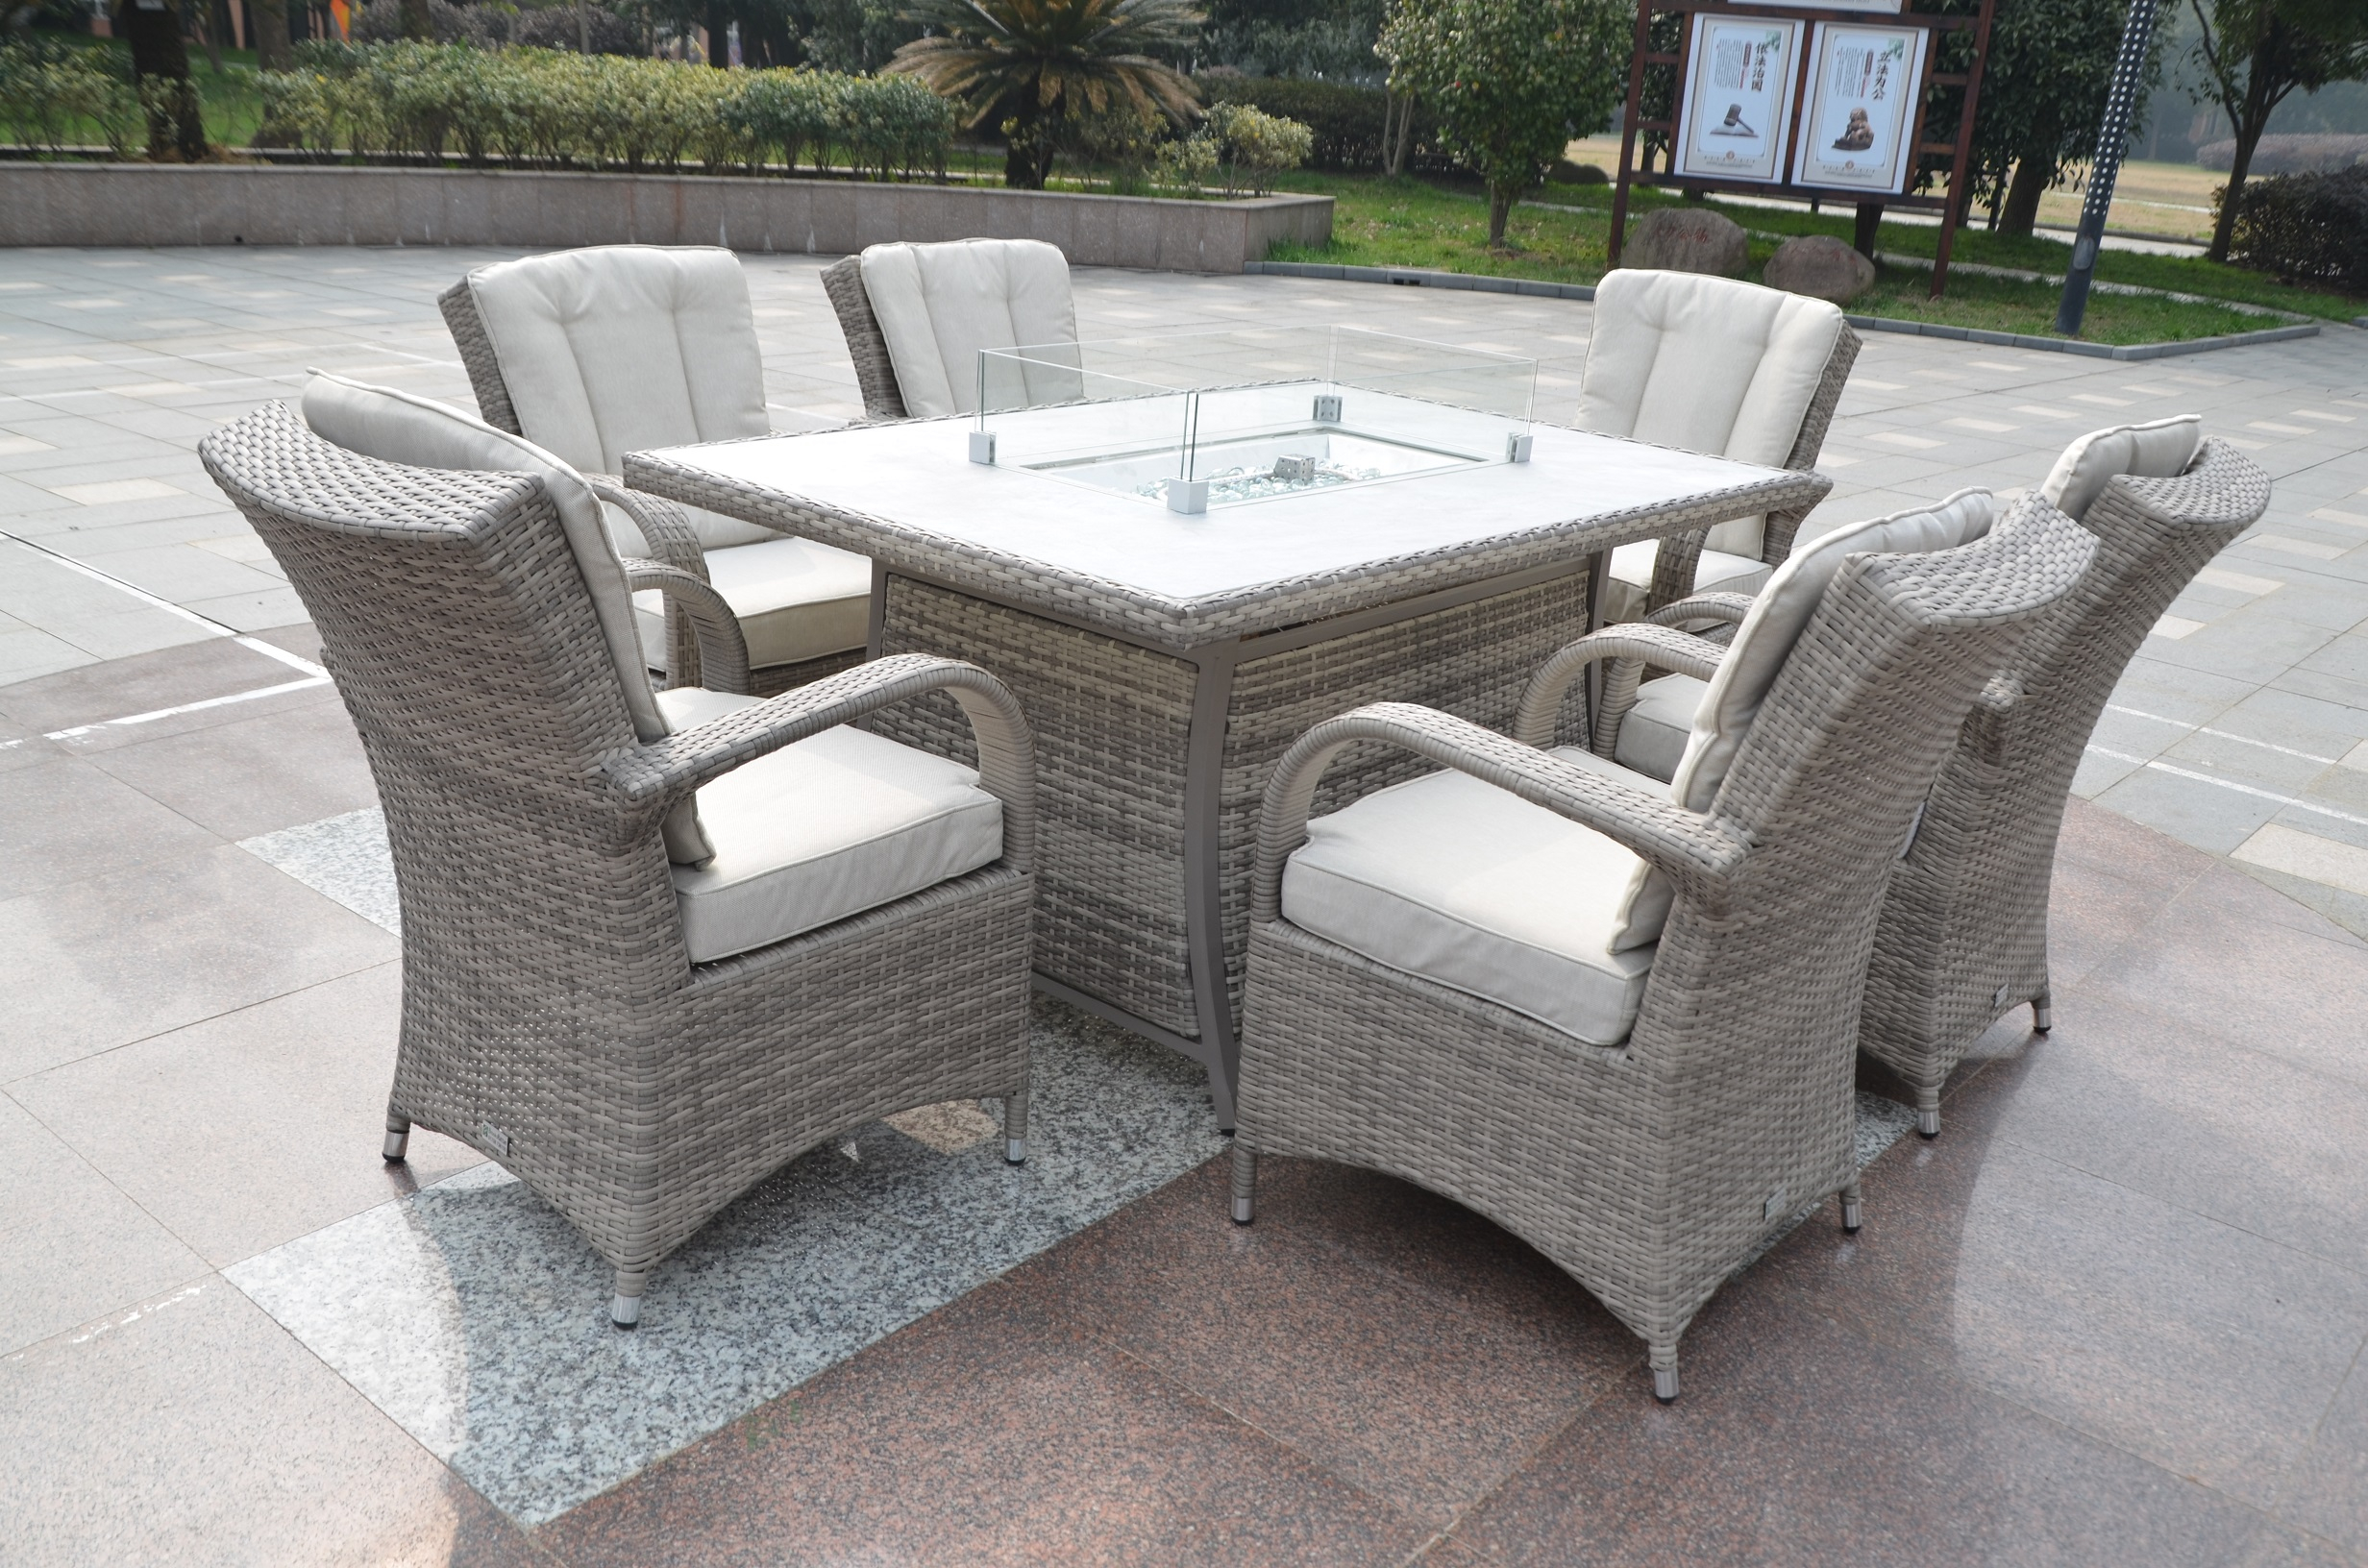 Rattan Garden Furniture Dining Sets Best Quality Rattan pertaining to size 2464 X 1632